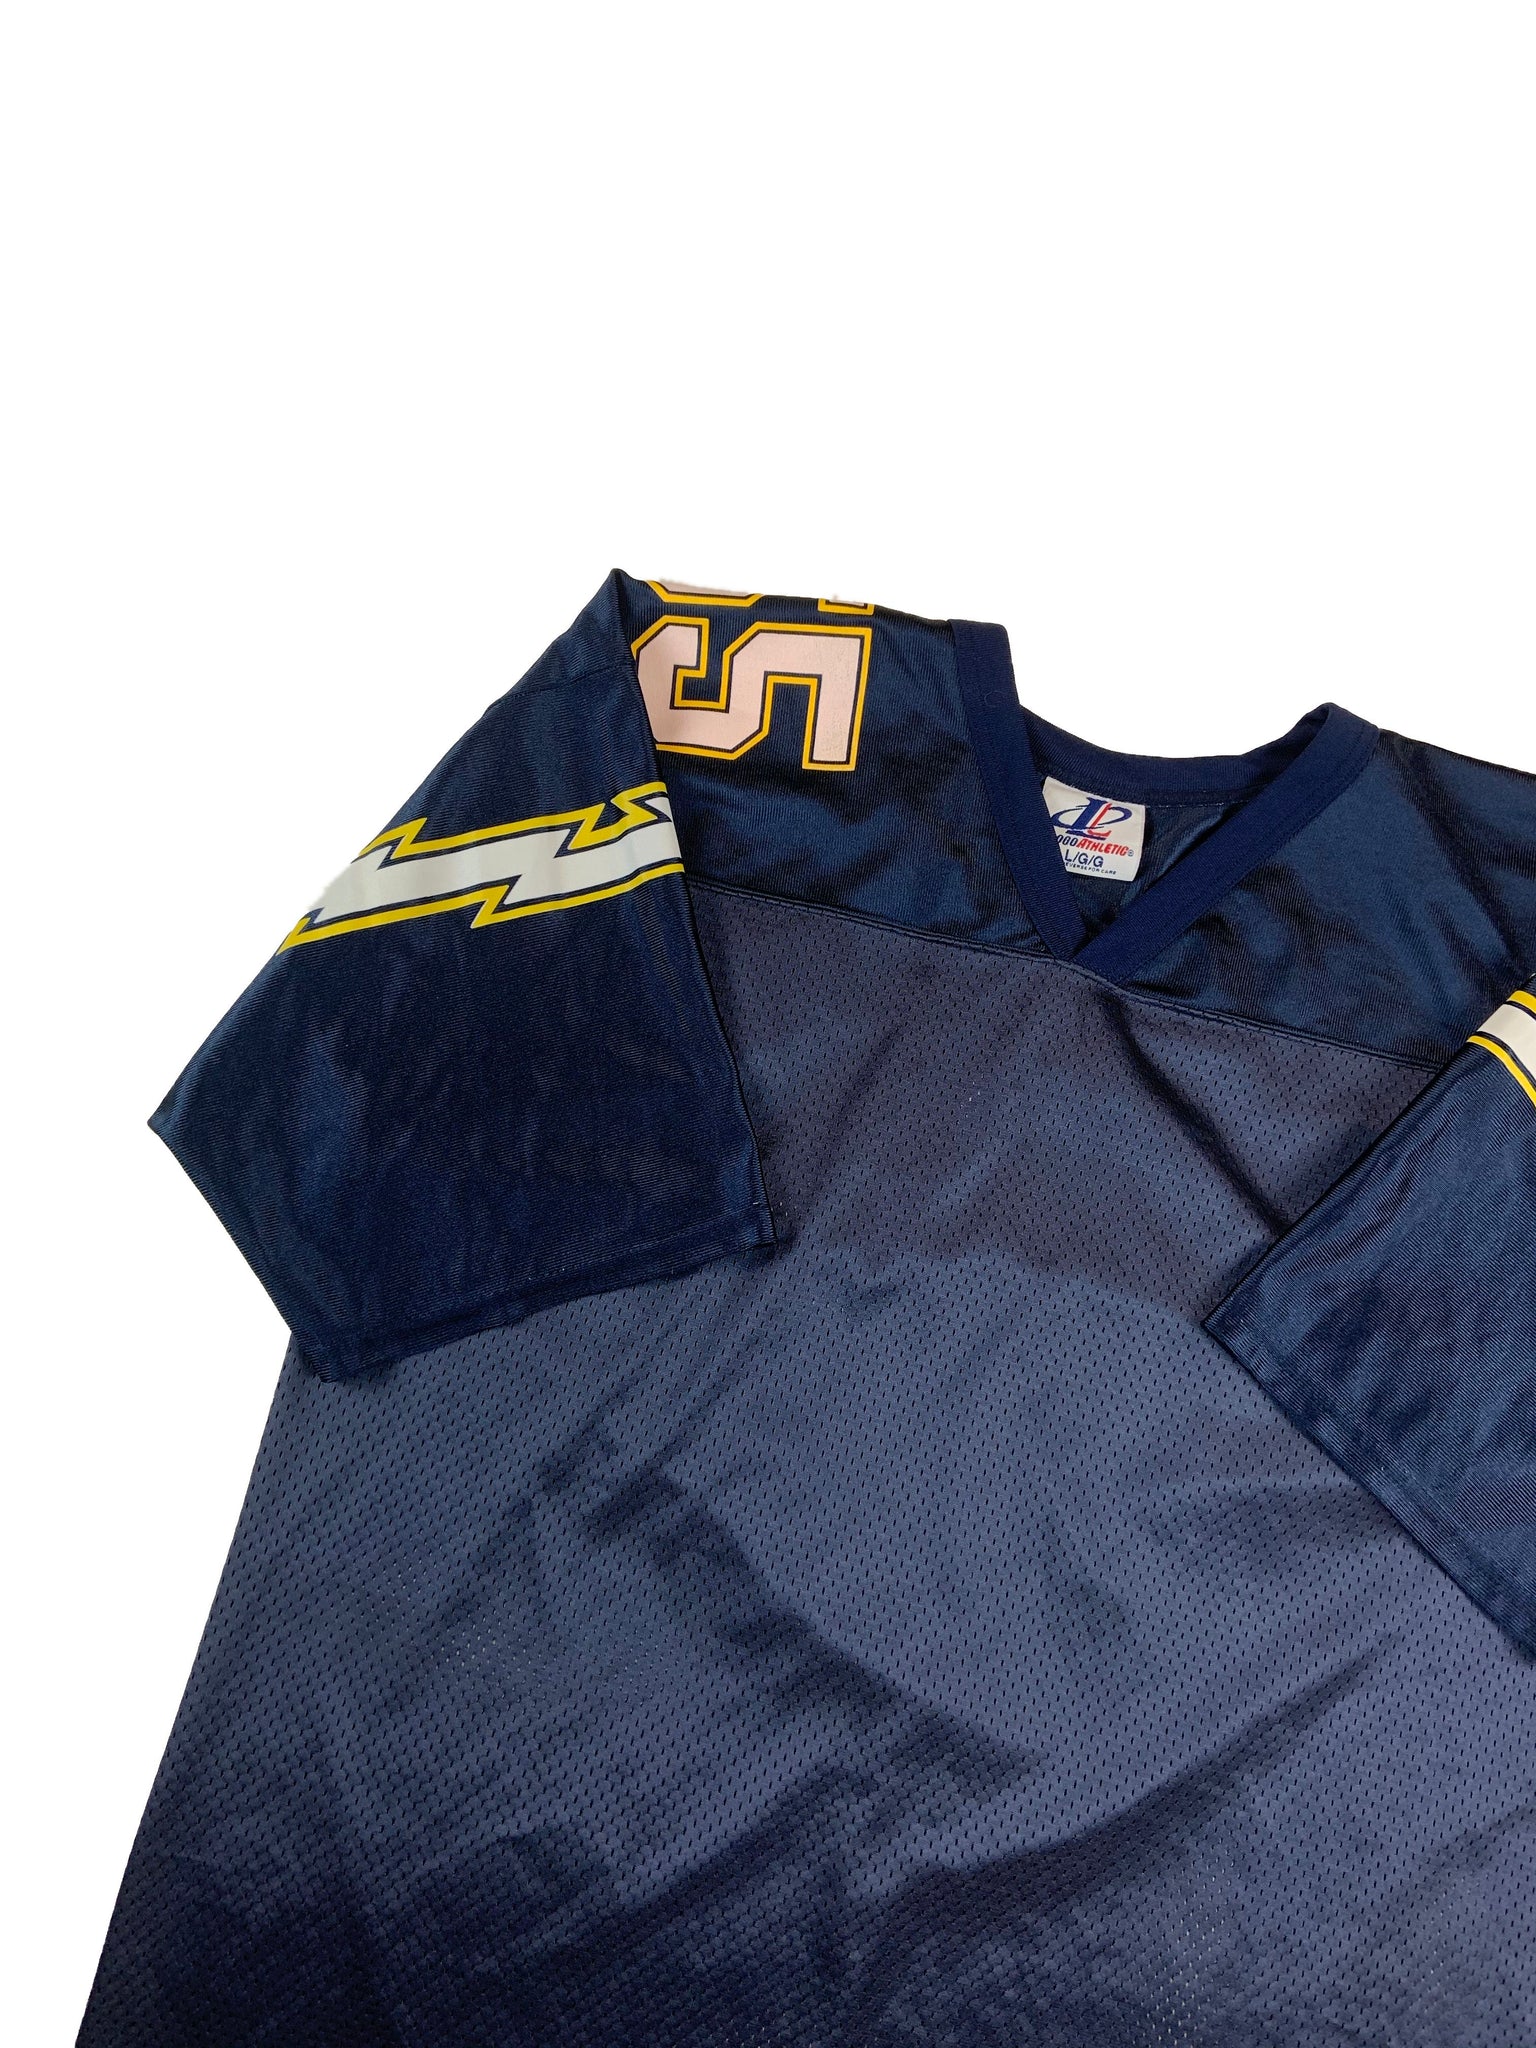 Vintage San Diego Chargers Seau Jersey